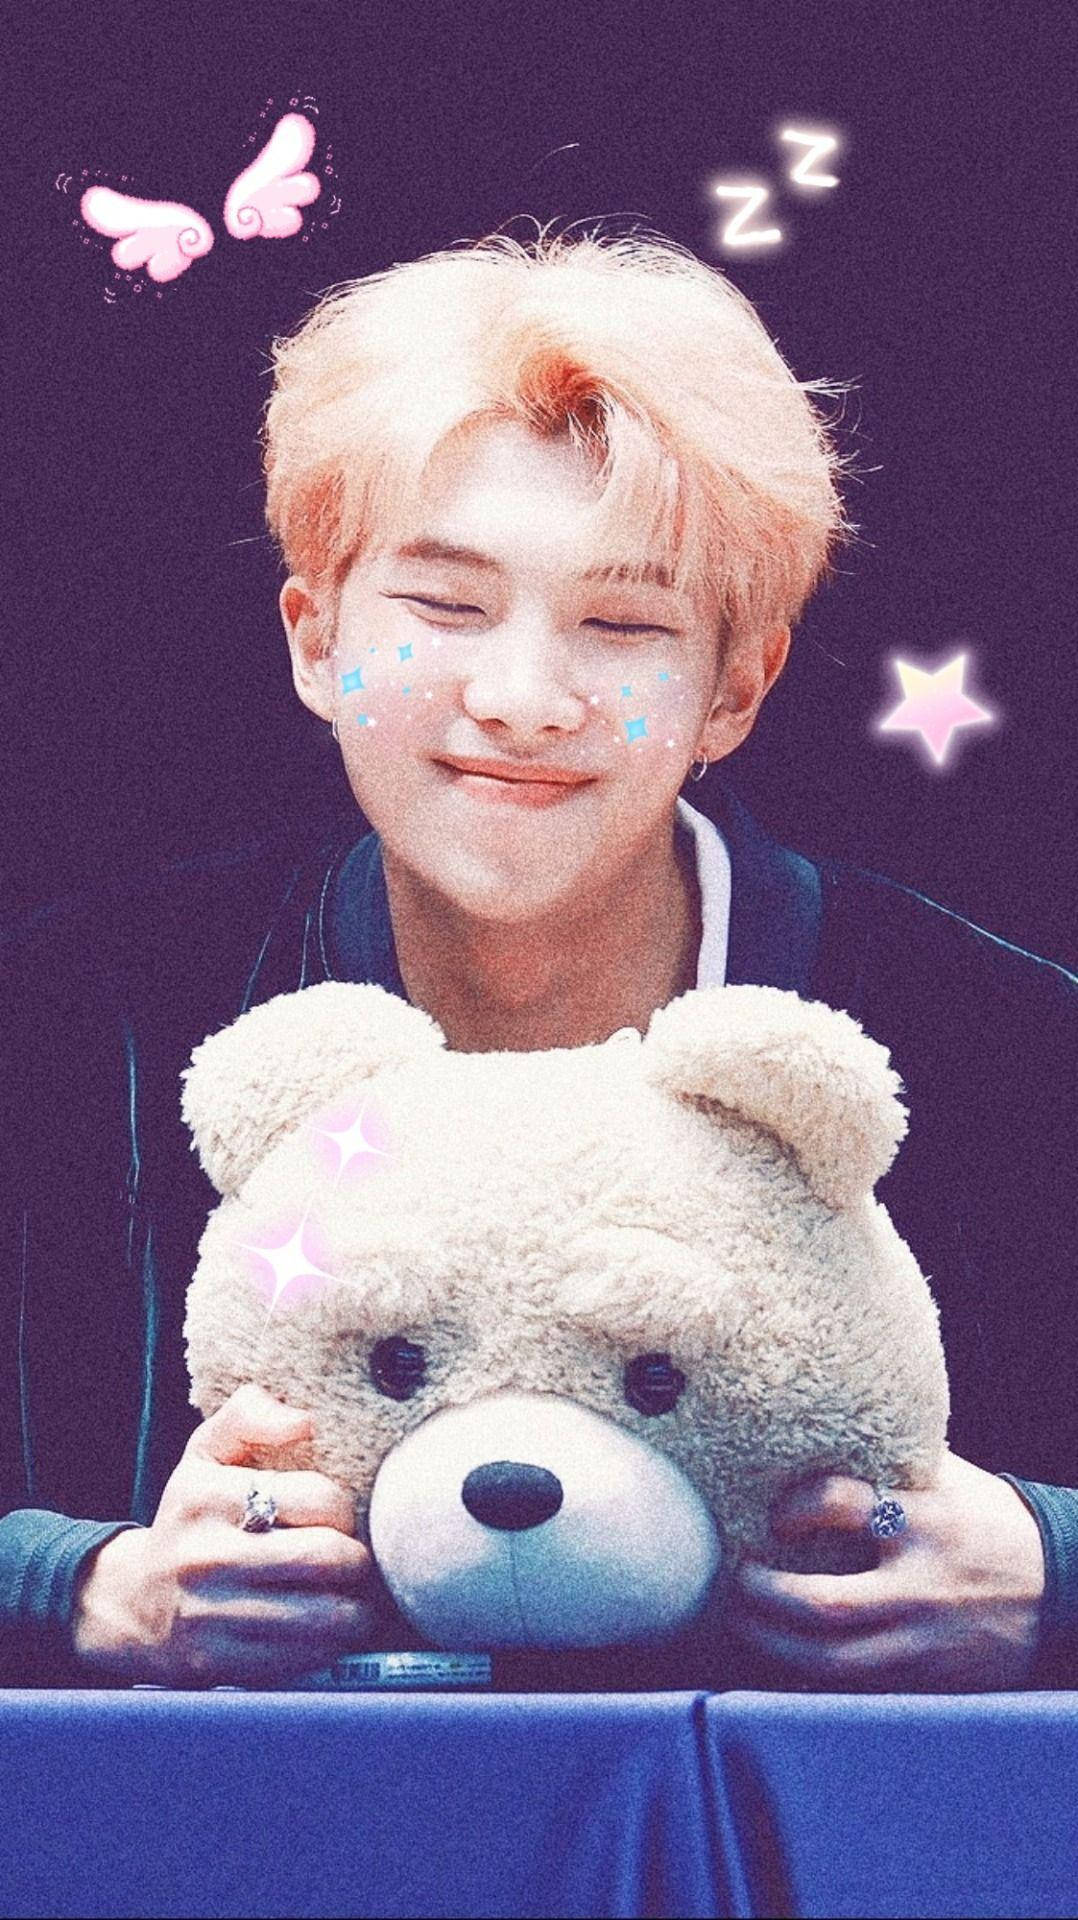 Rm Bts Teddy Day Event Background